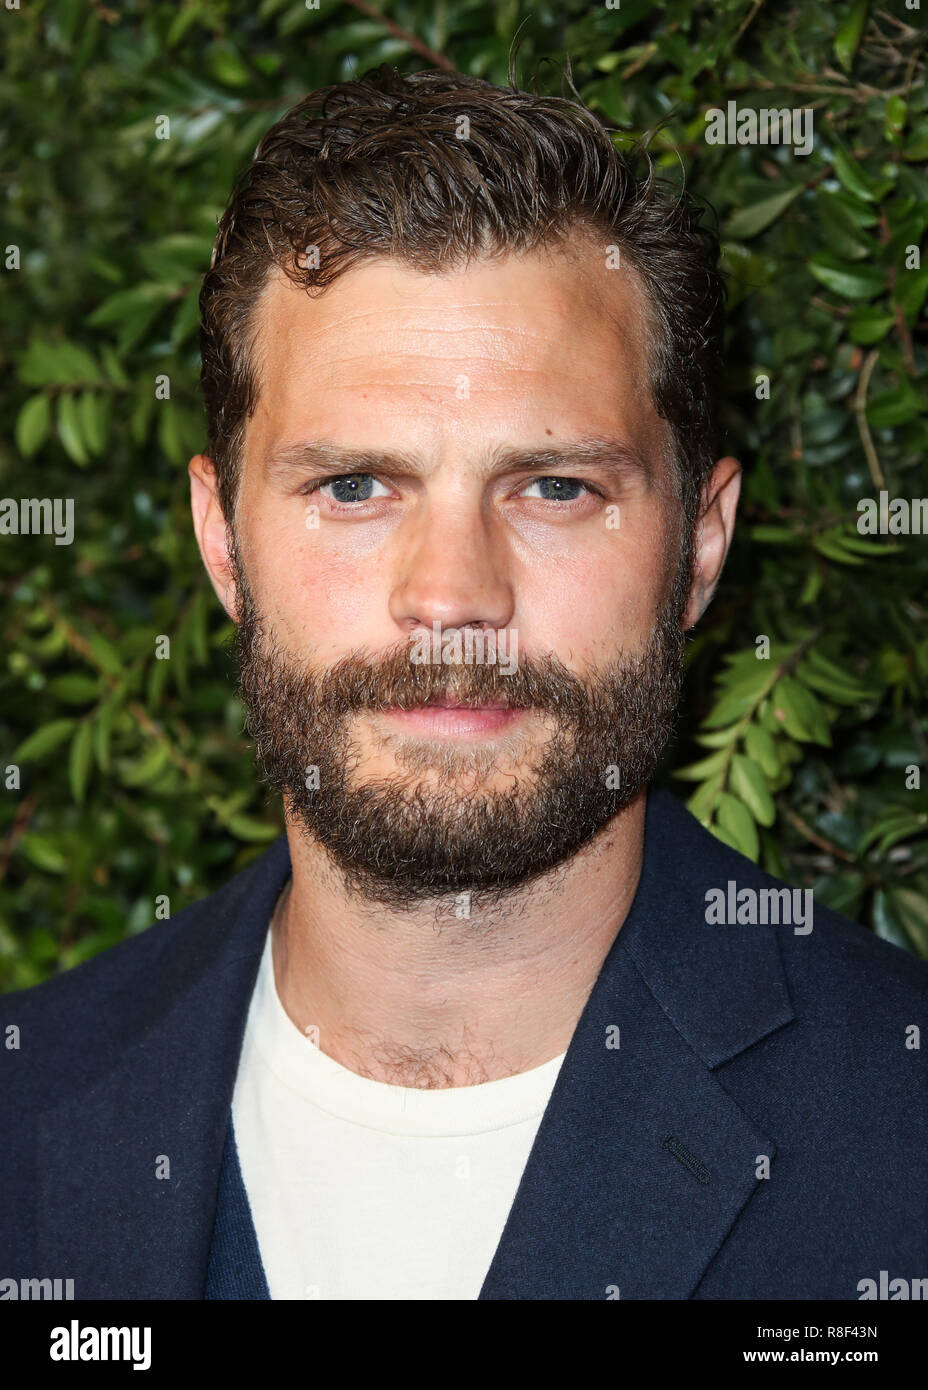 BEVERLY HILLS, LOS ANGELES, CA, USA - MARCH 03: Jamie Dornan at the Chanel And Charles Finch Pre-Oscar Awards Dinner 2018 held at Madeo Restaurant on March 3, 2018 in Beverly Hills, Los Angeles, California, United States. (Photo by Xavier Collin/Image Press Agency) Stock Photo